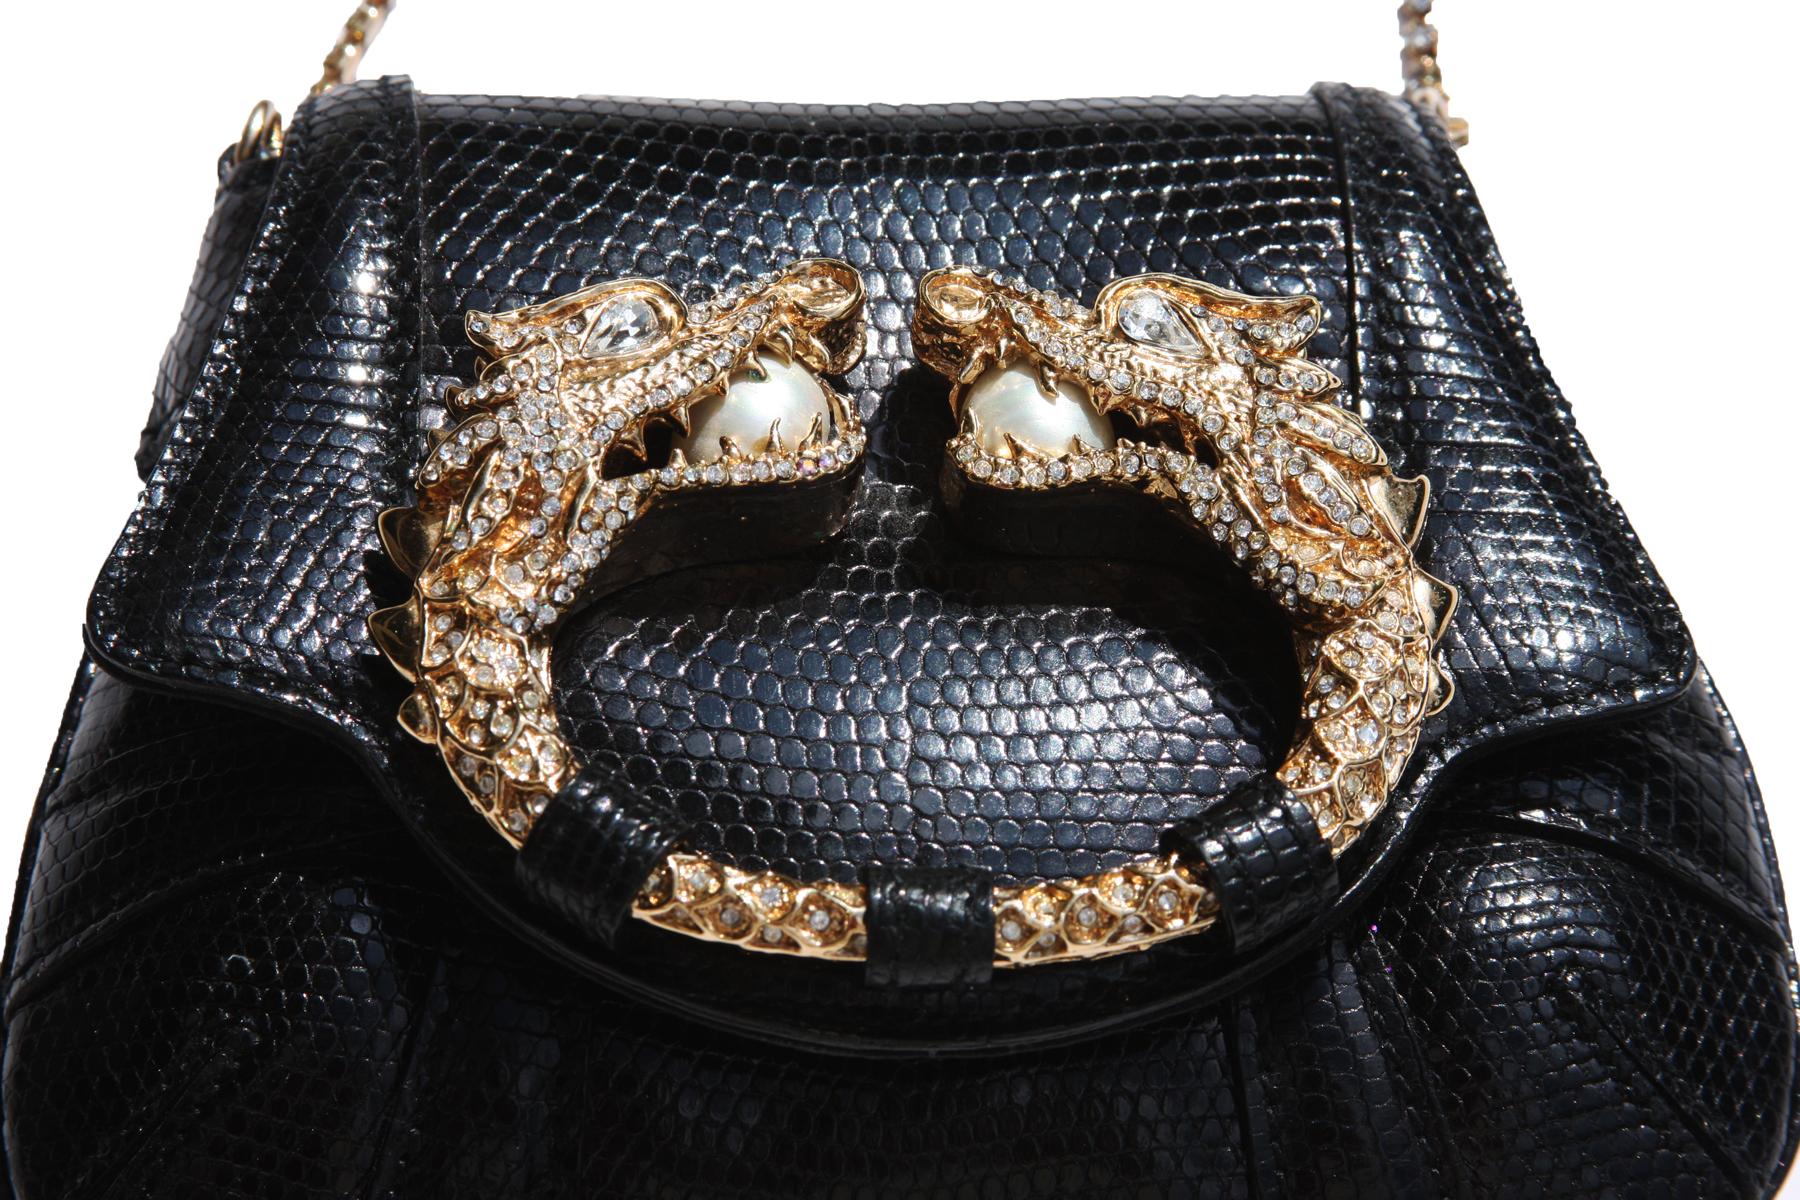 Black Tom Ford for Gucci F/W 2004 Lizard Evening Clutch Bag Jeweled Dragon  For Sale